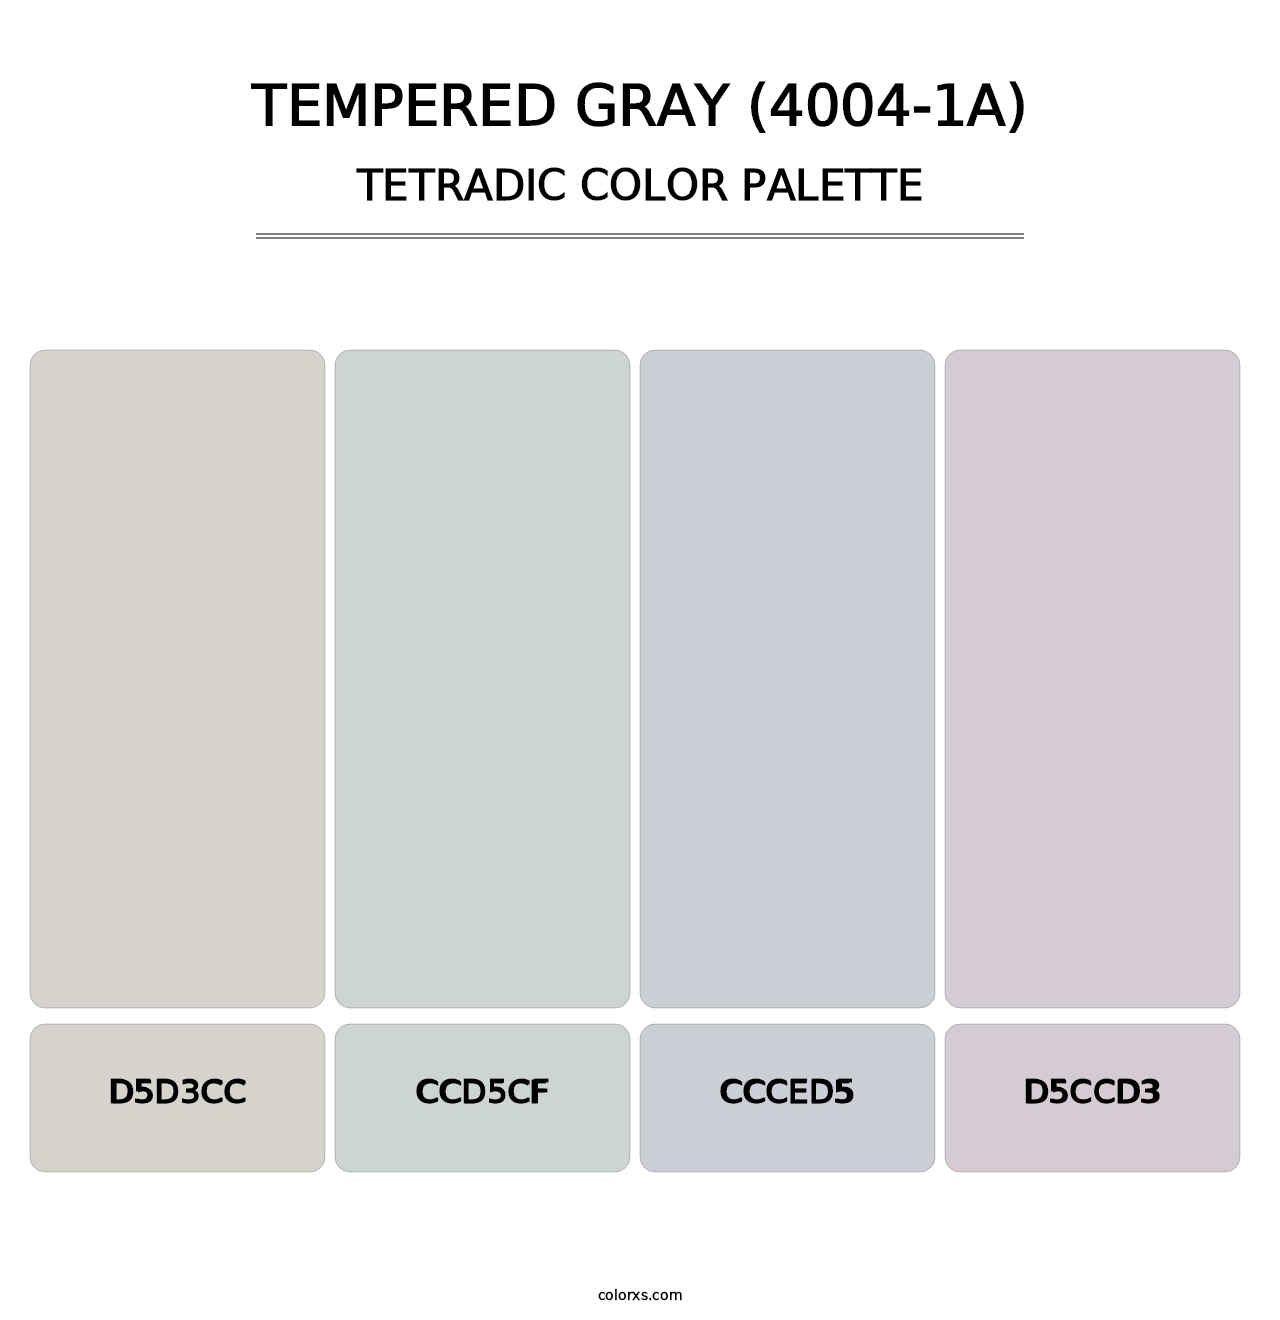 Tempered Gray (4004-1A) - Tetradic Color Palette